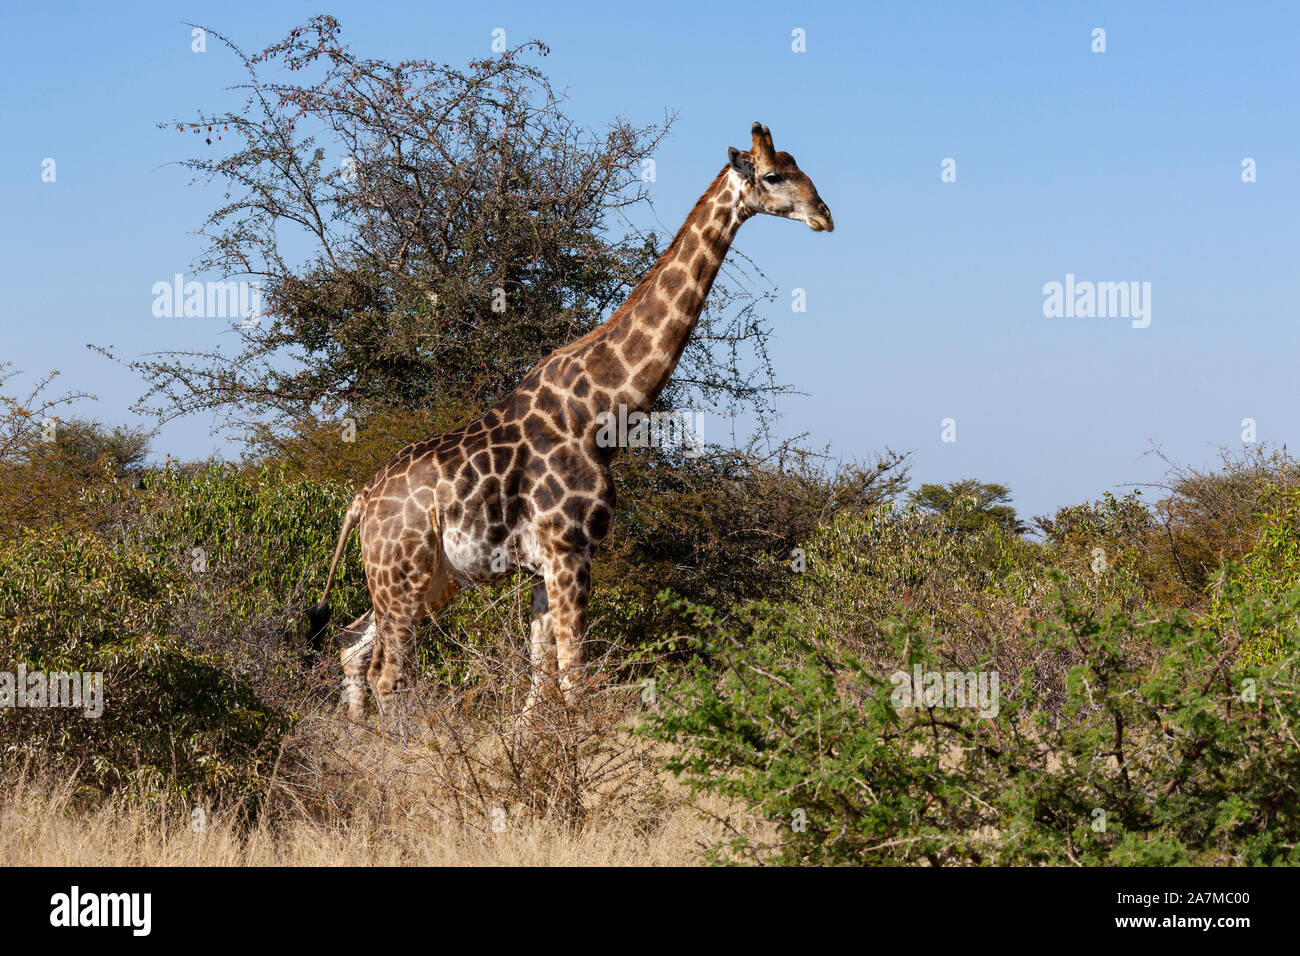 Giraffe (Giraffa camelopardalis). An African even-toed ungulate mammal, the tallest living terrestrial animal and the largest ruminant. Savuti region Stock Photo